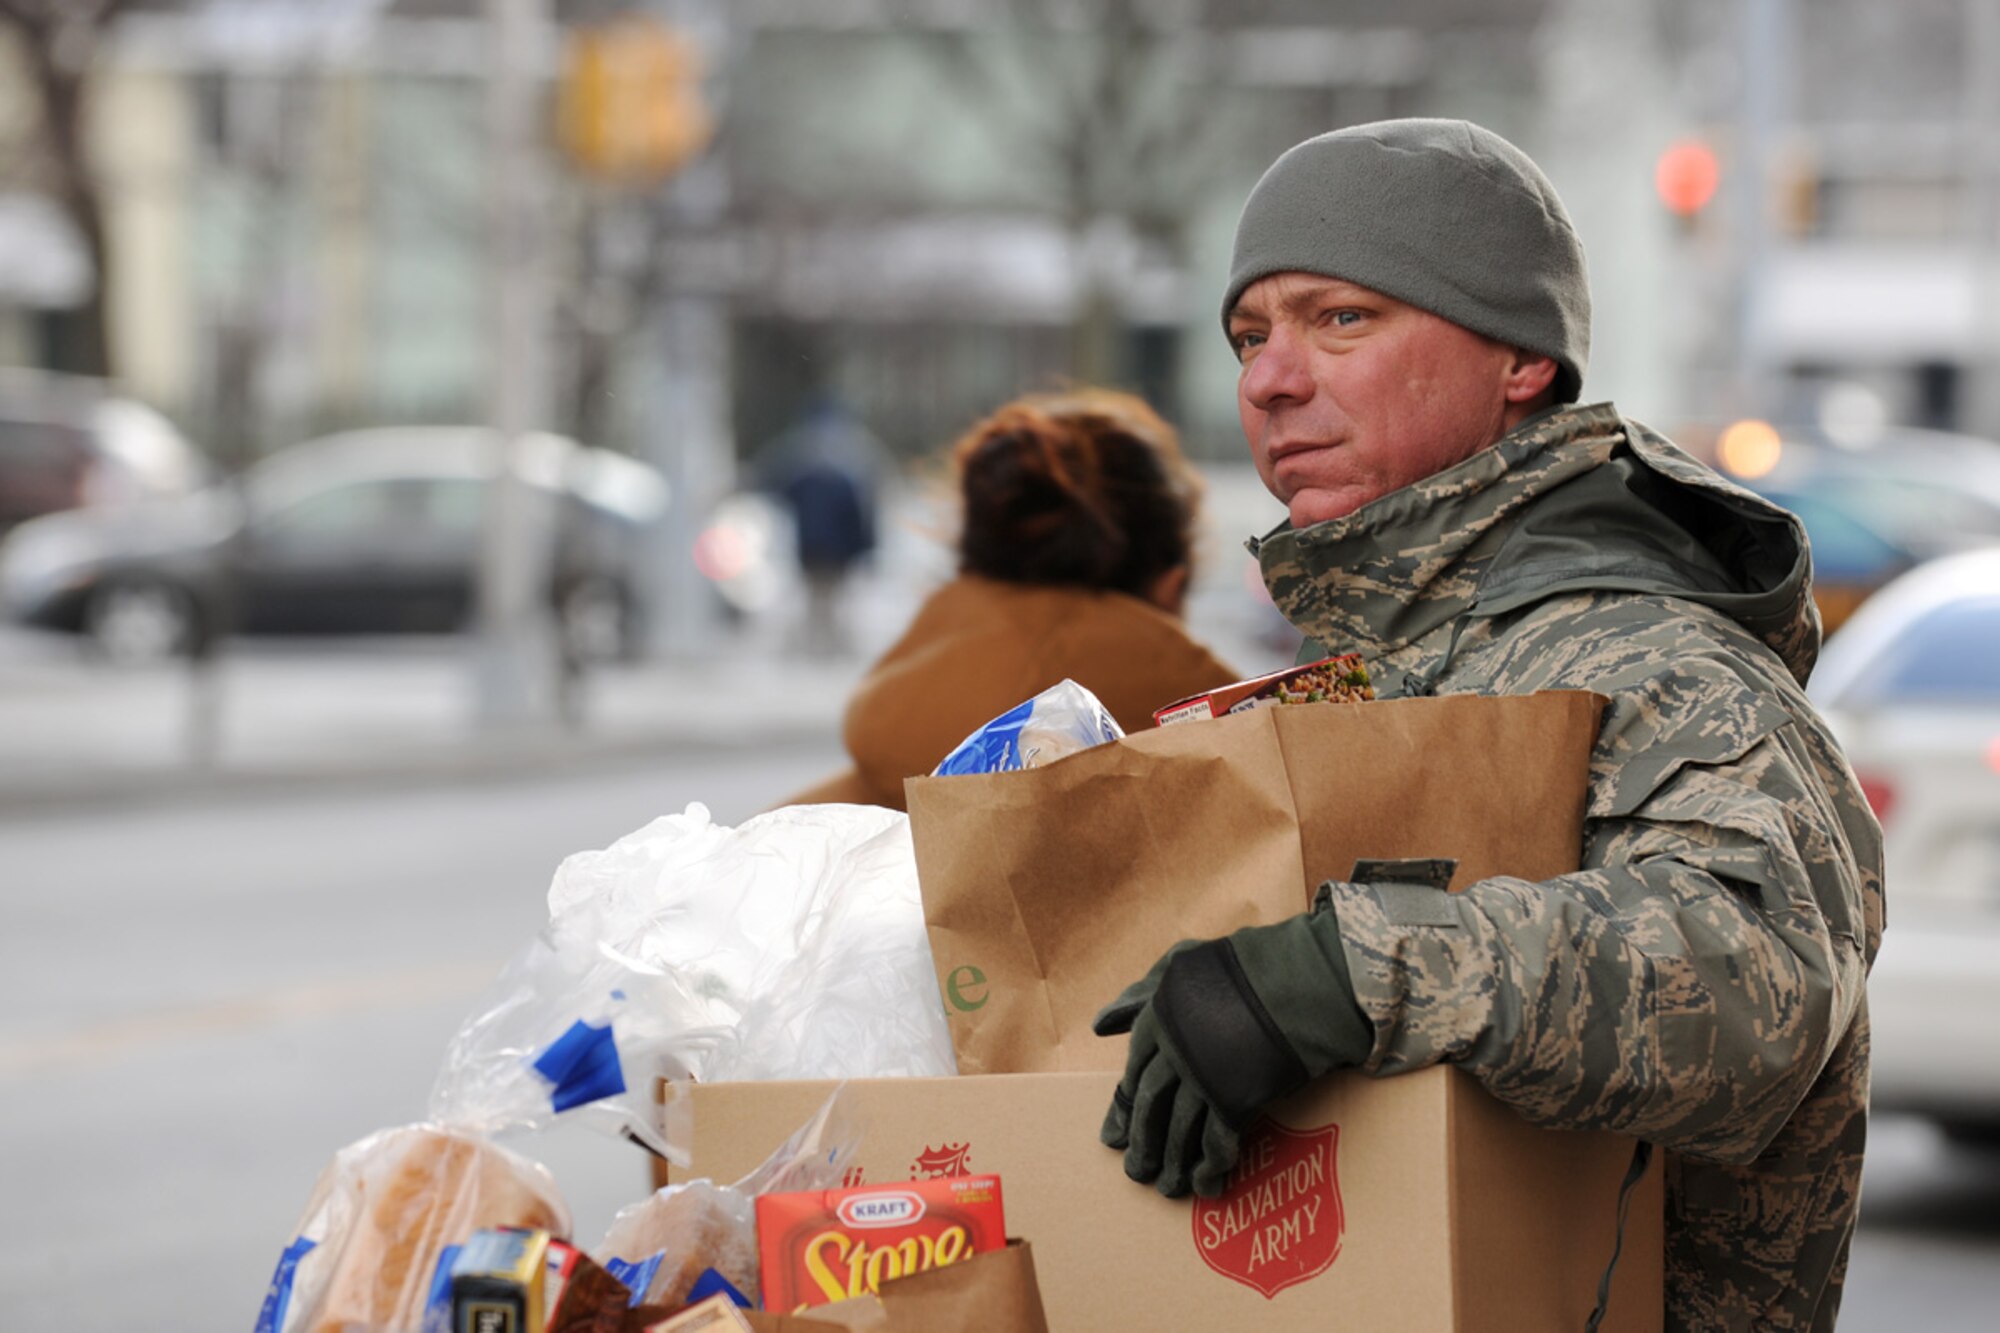 US Air Force Master Sgt. Christopher S. Duffy prepares to carry a box of food items to a car at the Oncenter Complex in Syracuse, NY on 22 Dec. 2009. Addley was volunteering at the Annual Christmas Bureau Salvation Army Food and Gift drive supplying needy families with gifts for their children and food for their Holiday meal. (US Air Force photo by Tech. Sgt. Jeremy M. Call/Released)